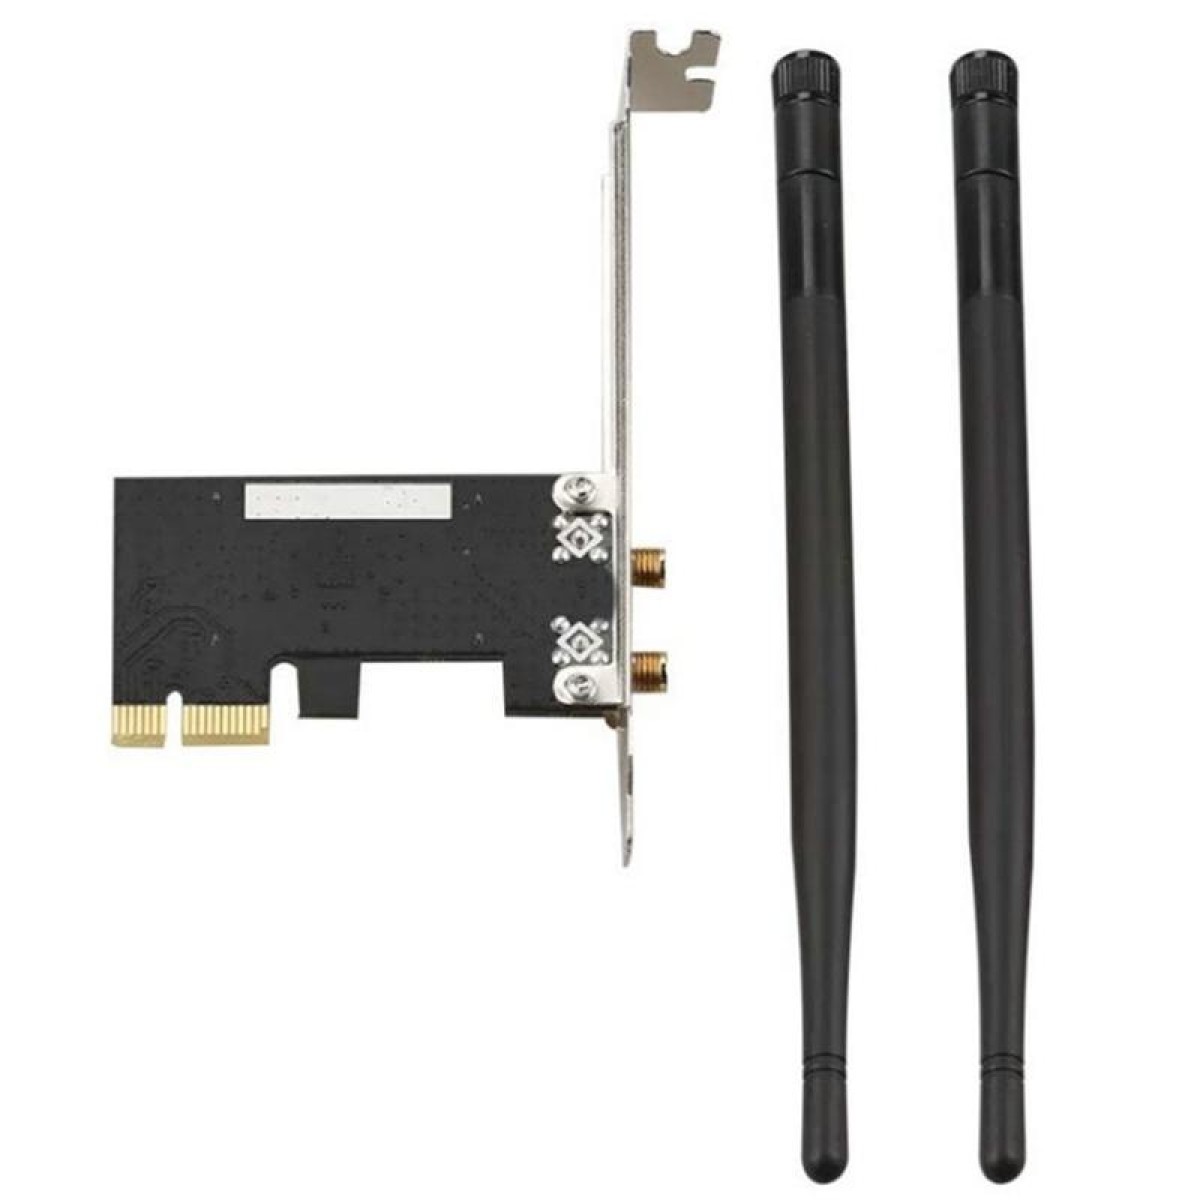 300M Dual Frequency Wifi Receiver Wireless PCI-E Network Card